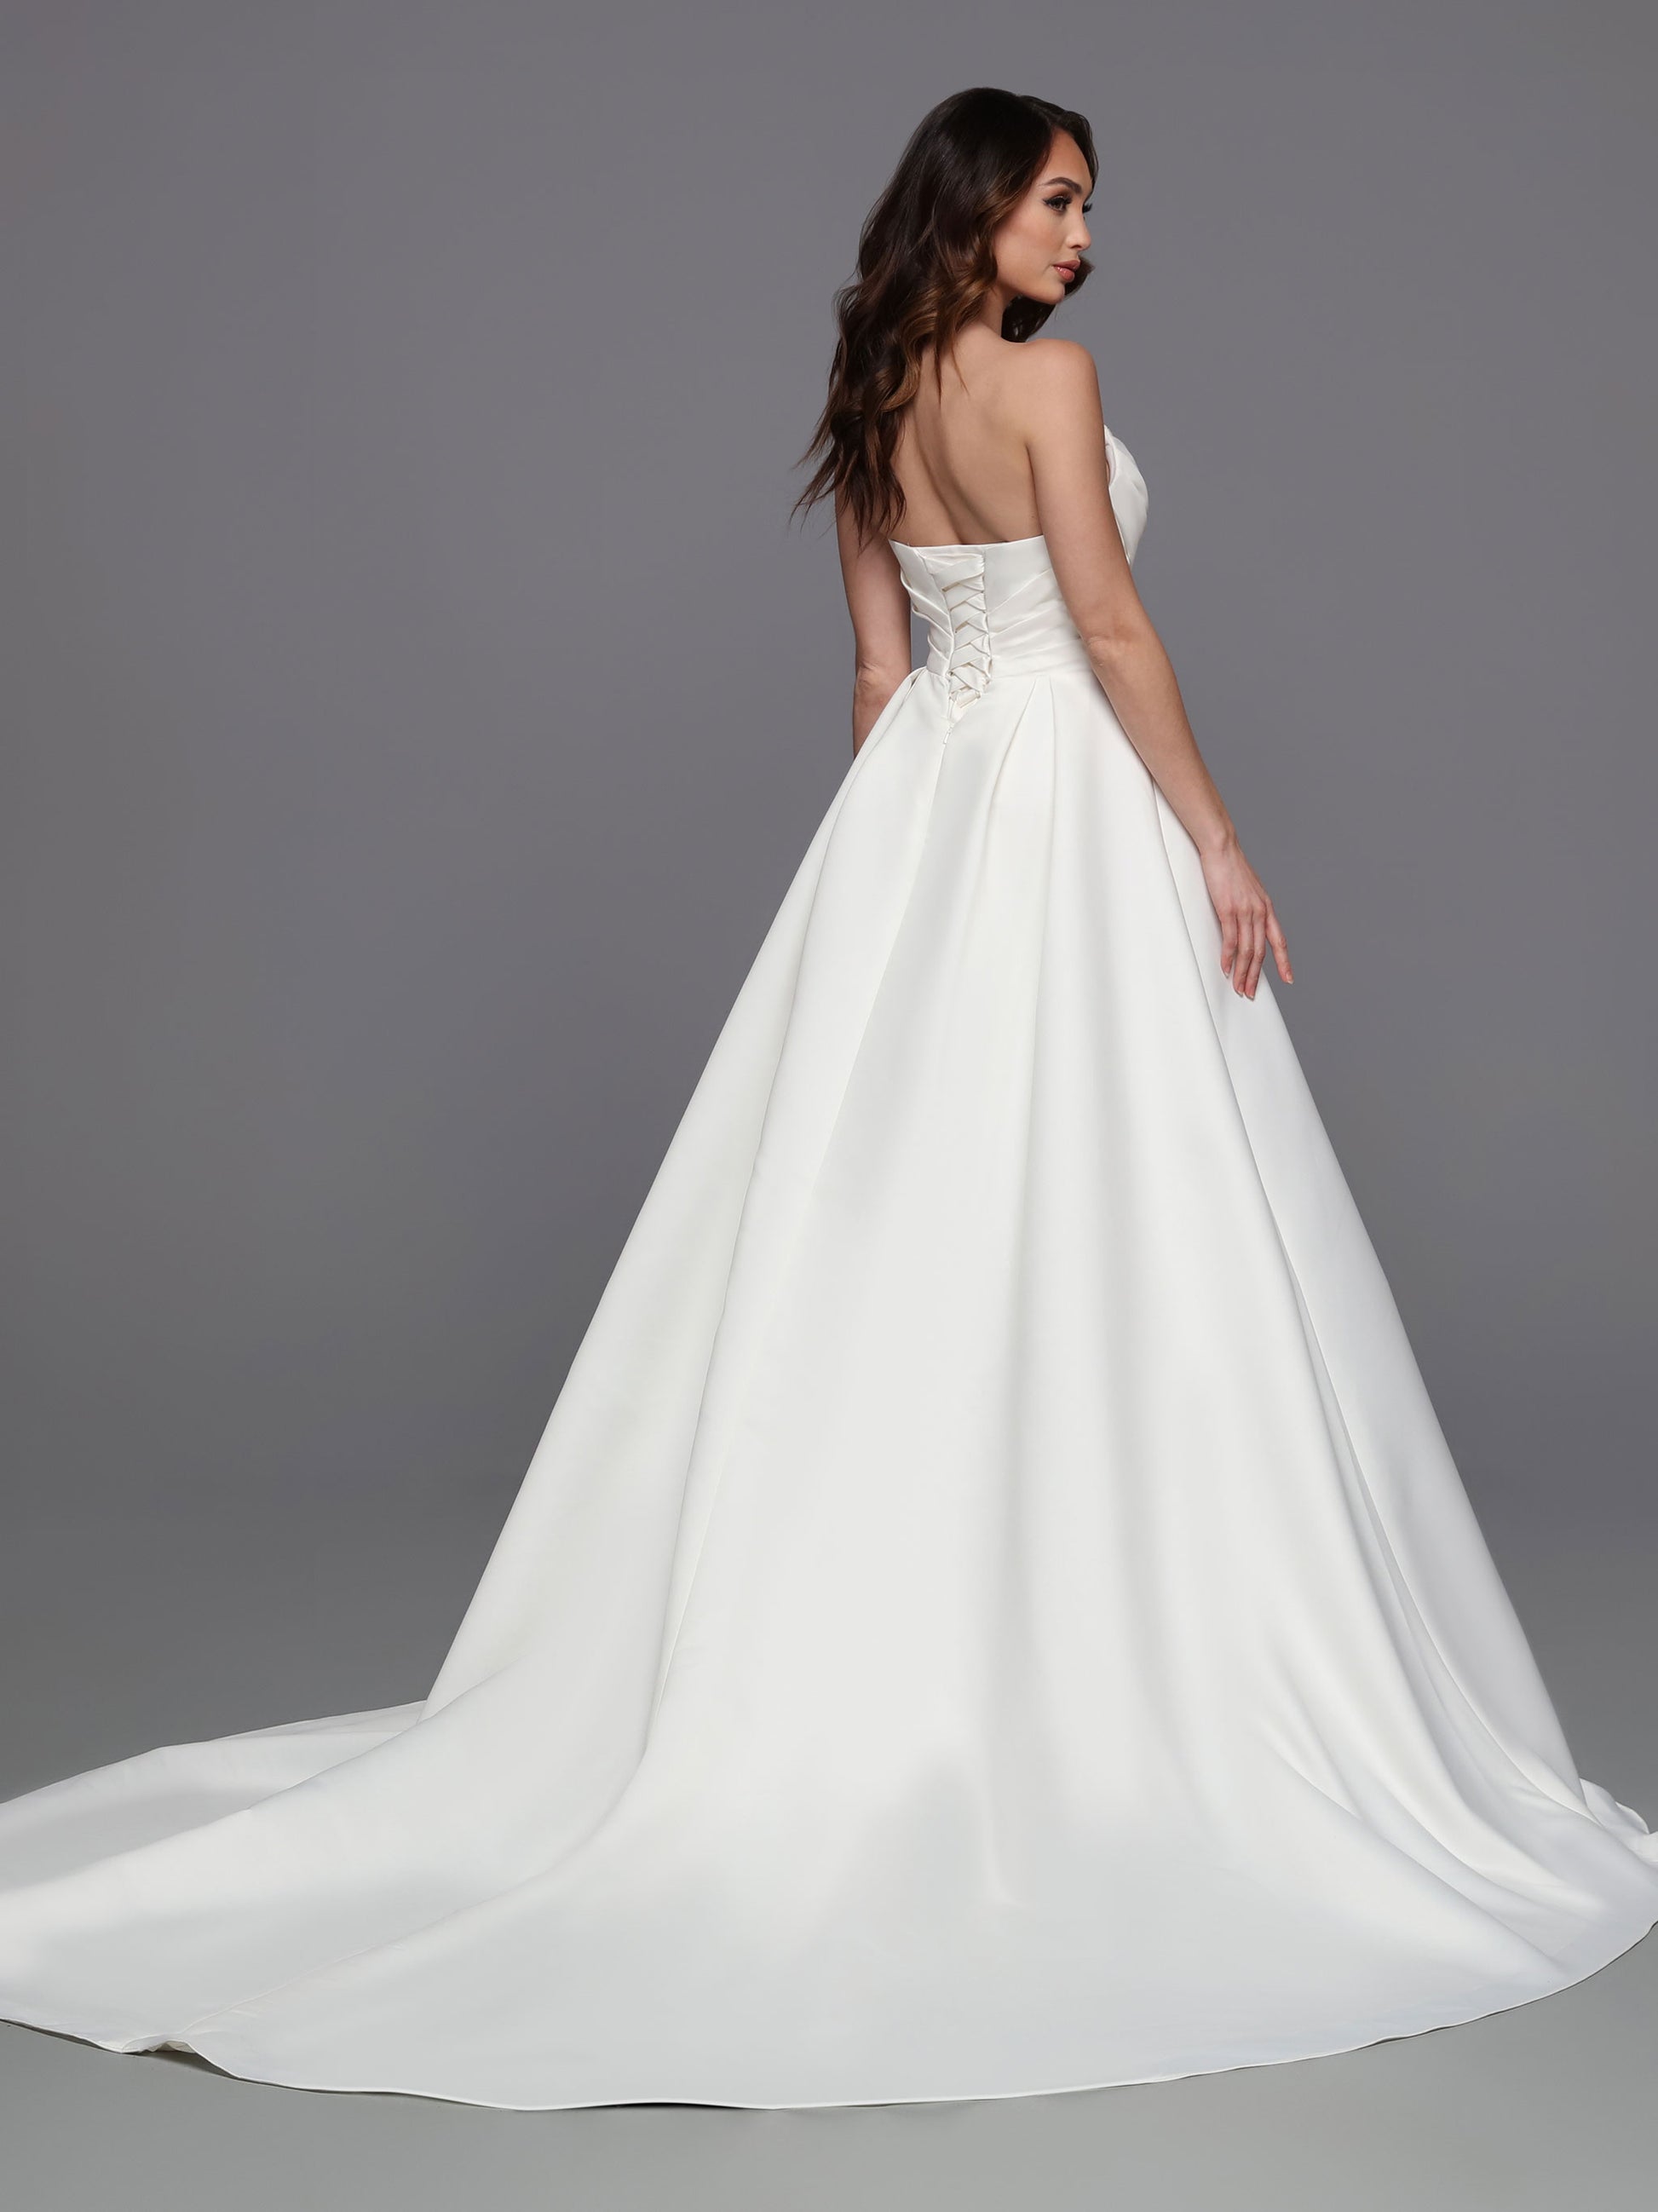 This stunning gown from Davinci Bridal is made from luxe satin and features a strapless faux-wrap bodice with a corset back and a slit maxi skirt for a modern, romantic look. The 50715 is perfect for a bride who wants a timeless style for her special day.  Sizes: 2-20  Colors: Ivory